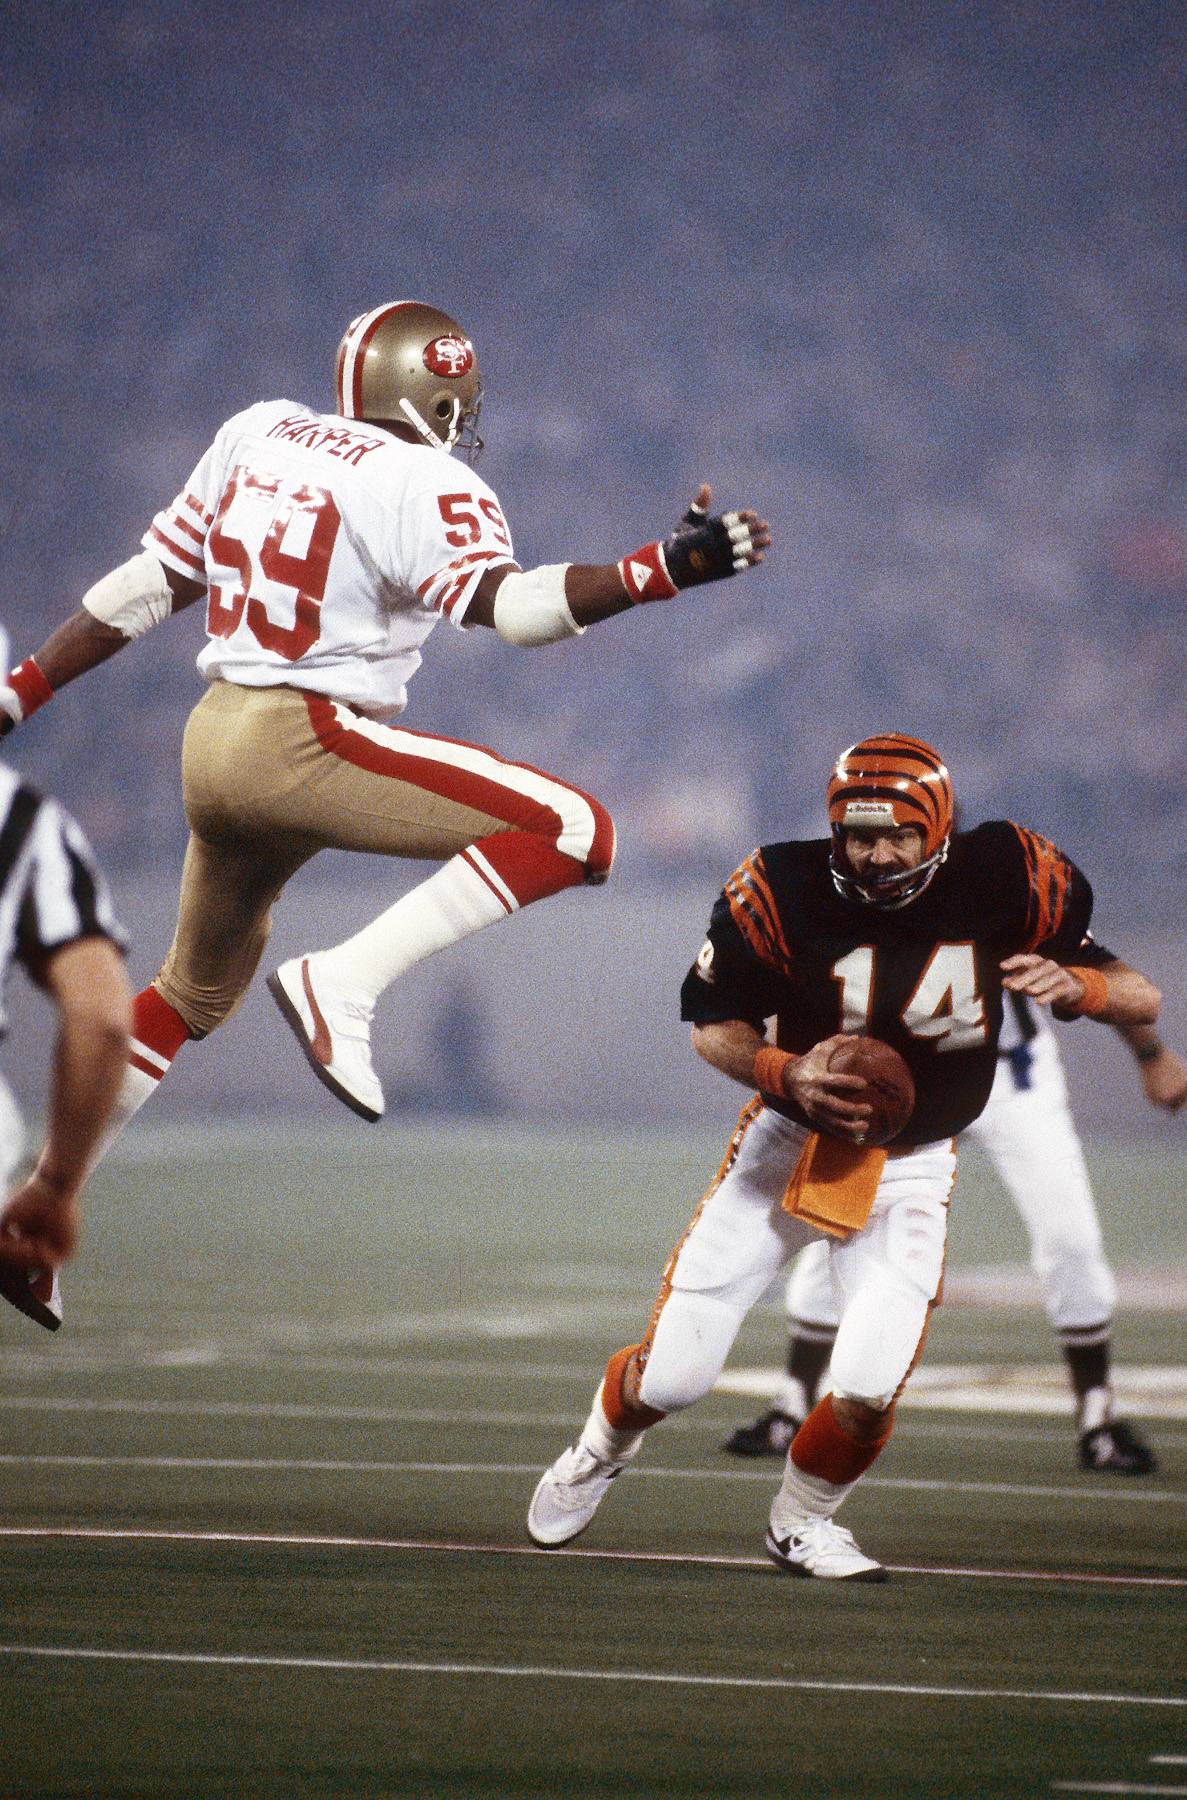 13. Super Bowl XVI - Image 9 from Top 20 Super Bowl Moments